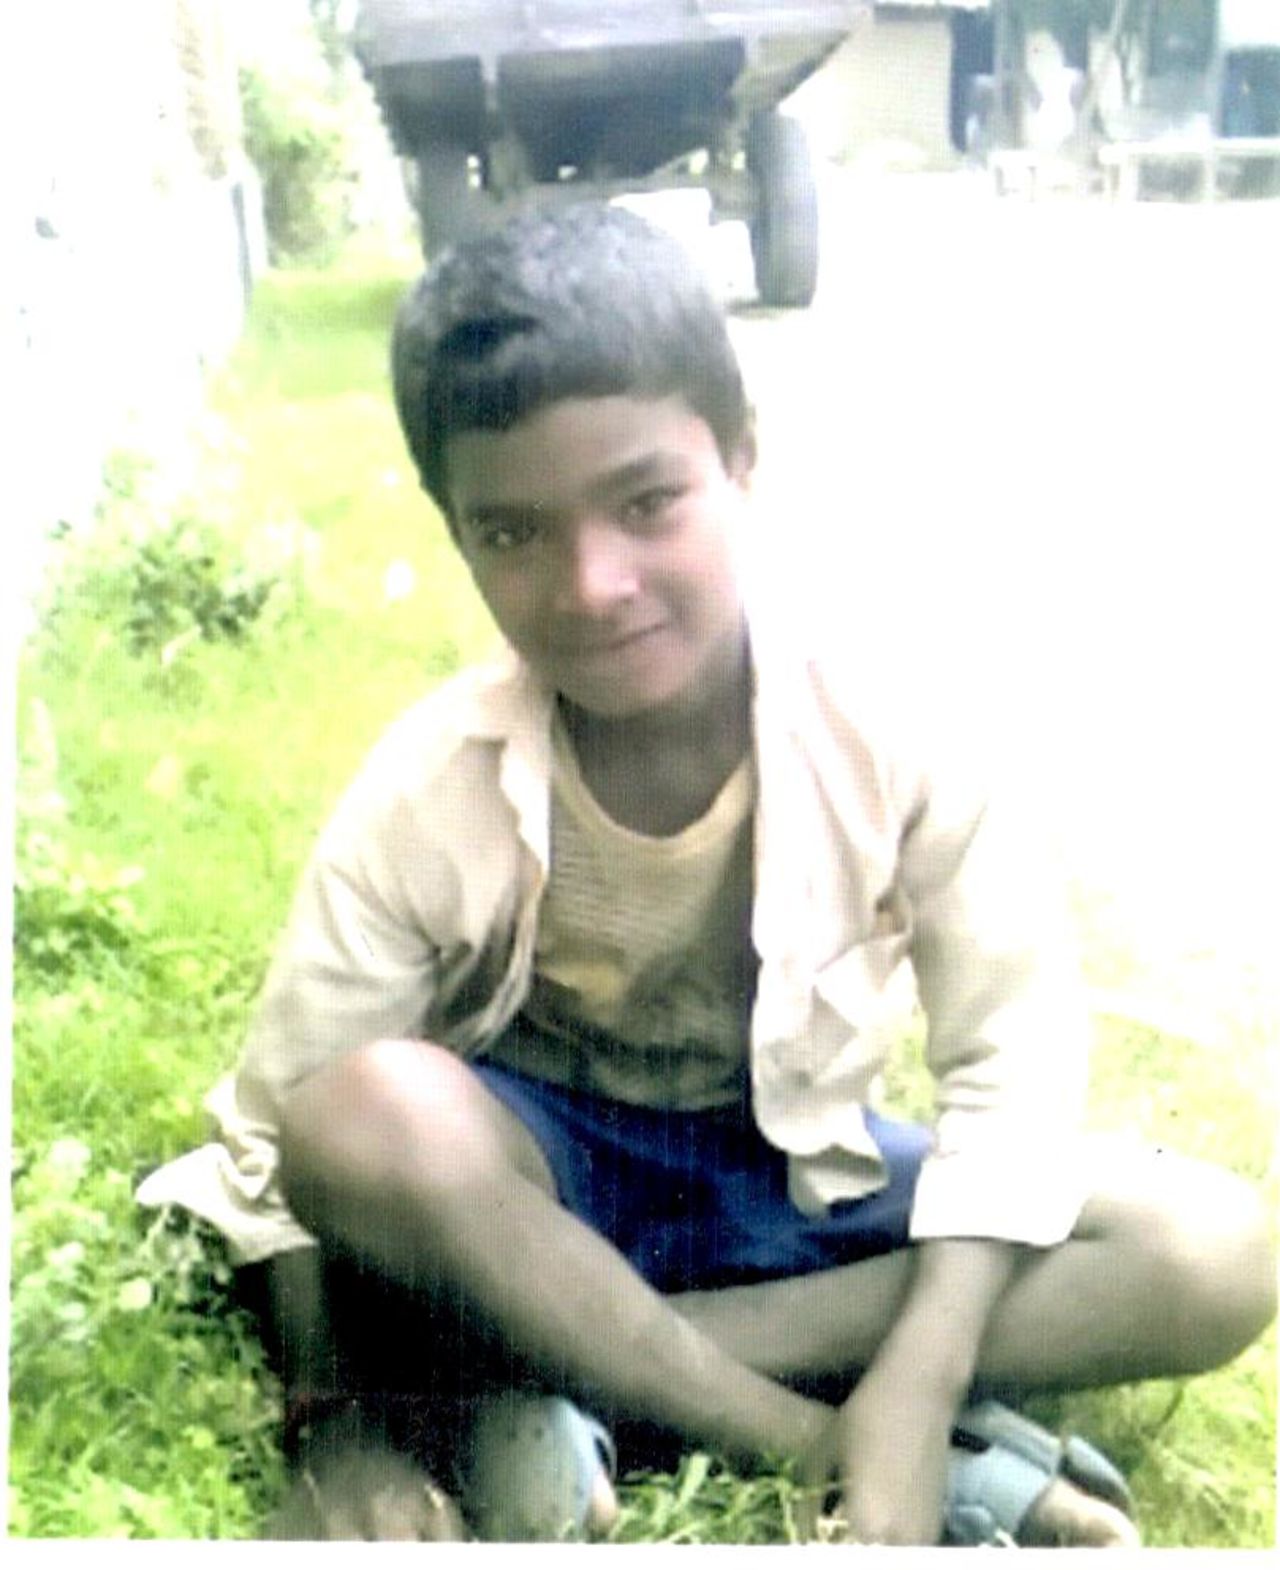 A photo of 10-year-old Jivan, whose body was found on July 24 on the outskirts of Kudiya village, in southwest Nepal. He'd been missing for three days.